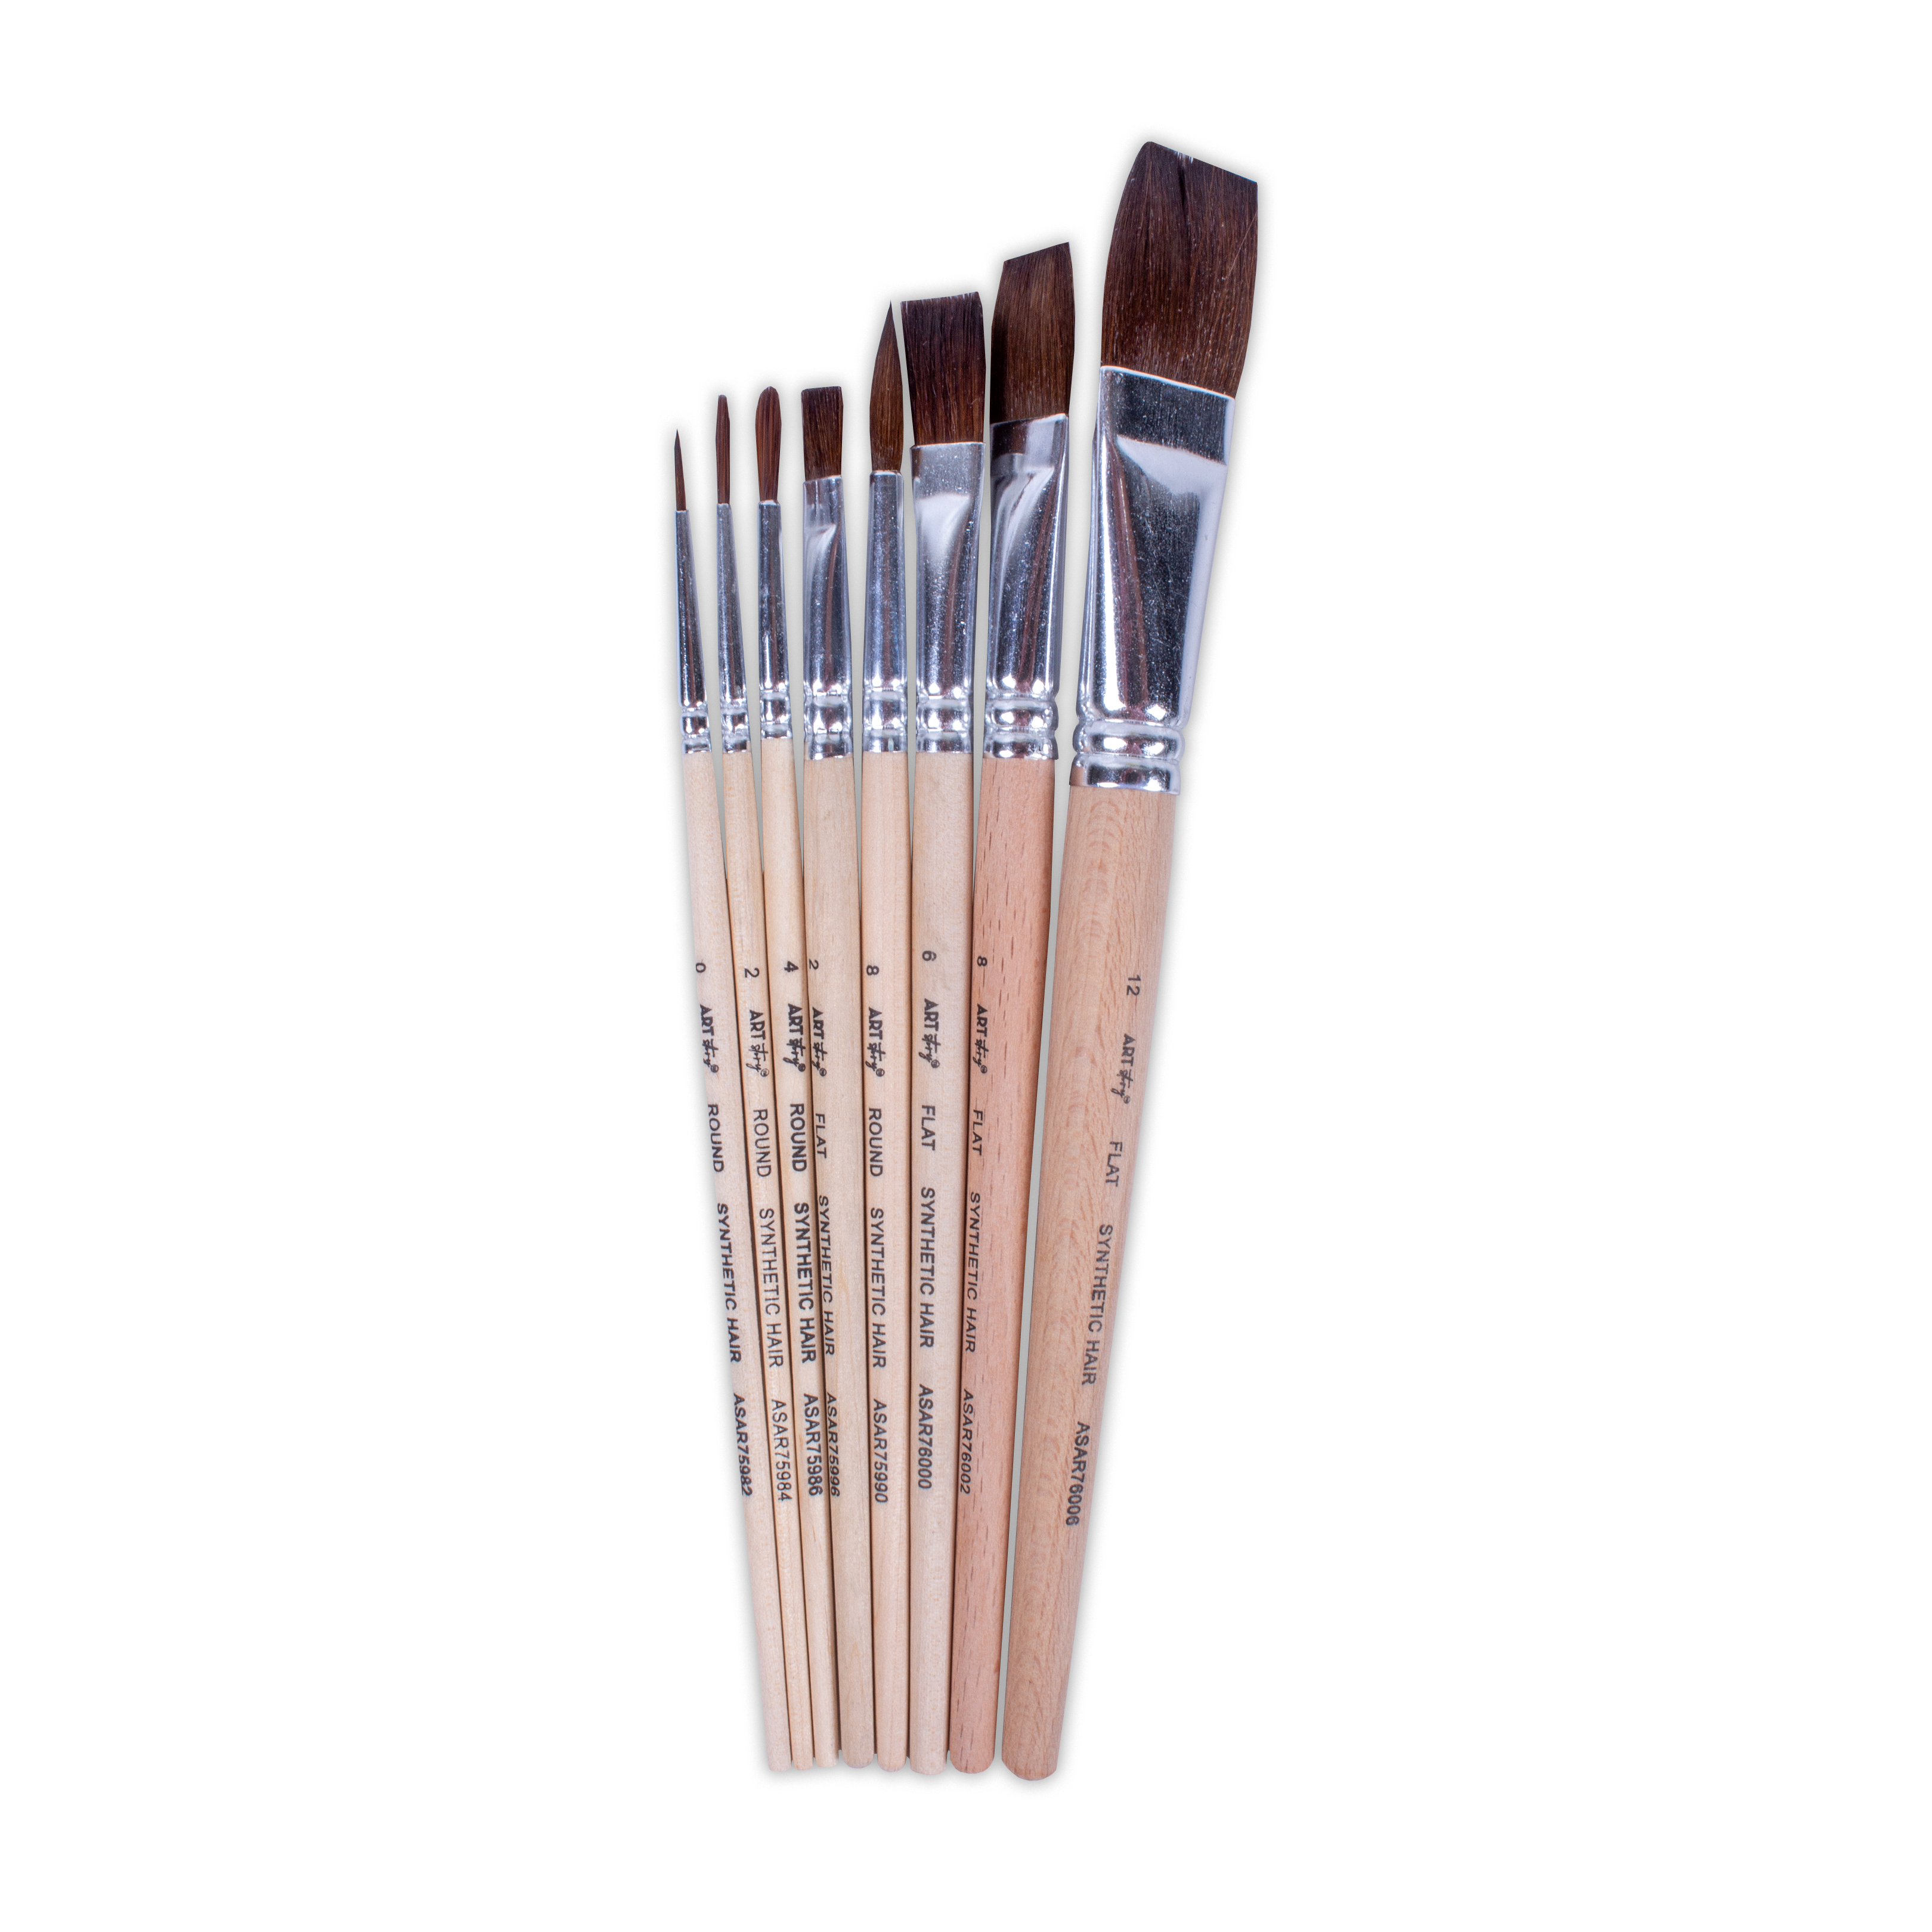 Watercolour Brush Round And Flat Synthetic Hair Size 0 2 4 8 And 2 6 8 12 8pc